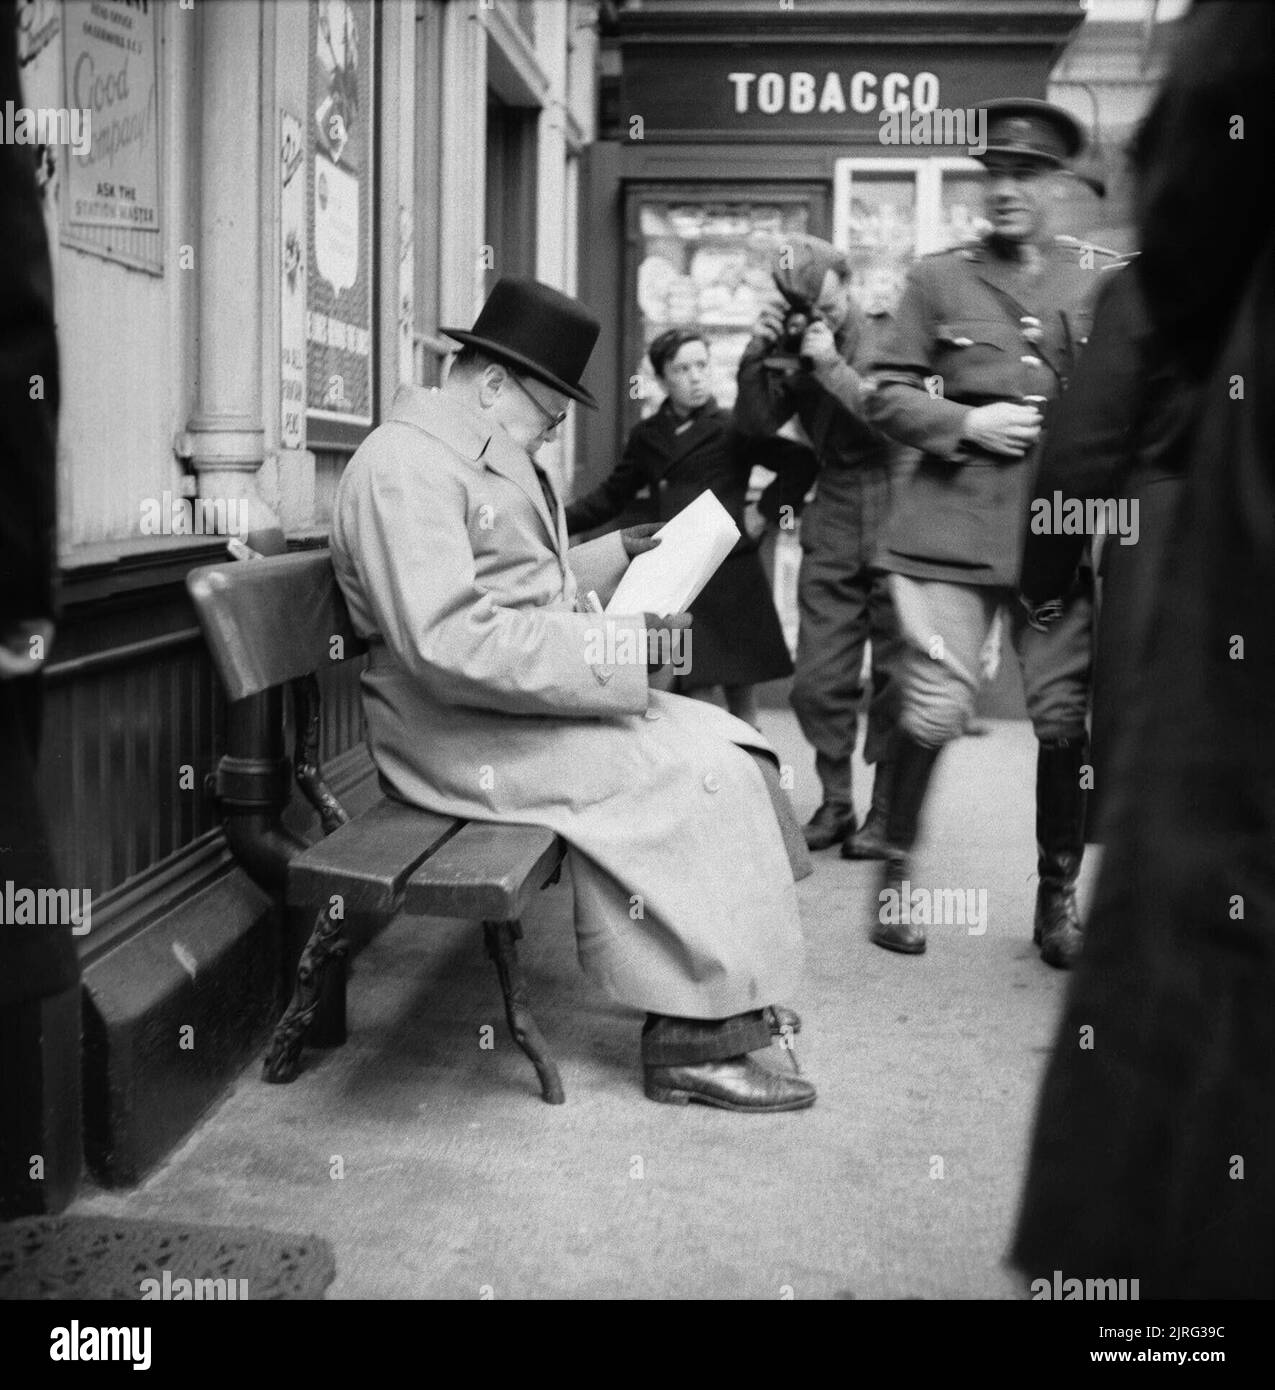 Winston Churchill reads a newspaper on the platform at St Andrews railway station, during a tour of defences and naval forces in Scotland, 23 October 1940. The Prime Minister Winston Churchill reads a newspaper on the platform while waiting for a train at St Andrews during a trip to Scotland to visit Polish troops, inspect coastal defences and tour a Naval Establishment in Fife on 23 October 1940. Stock Photo